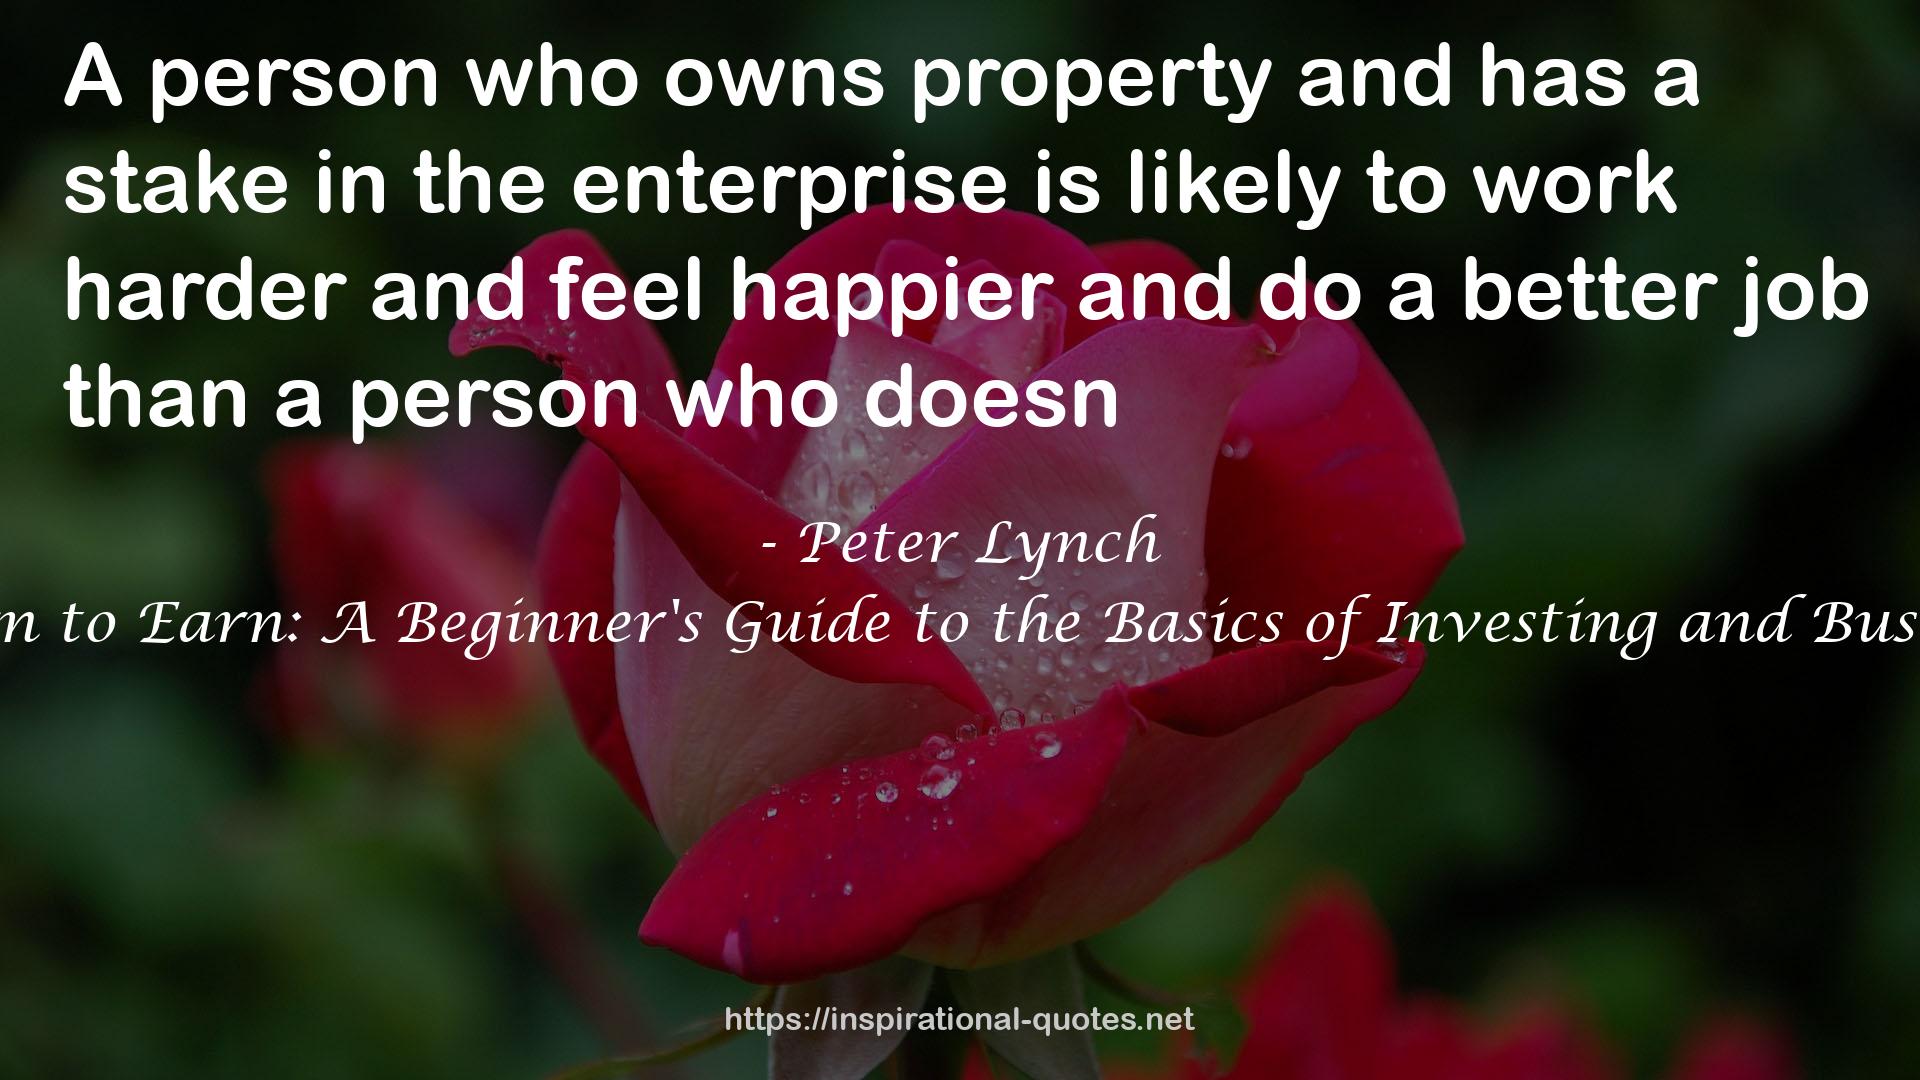 Learn to Earn: A Beginner's Guide to the Basics of Investing and Business QUOTES